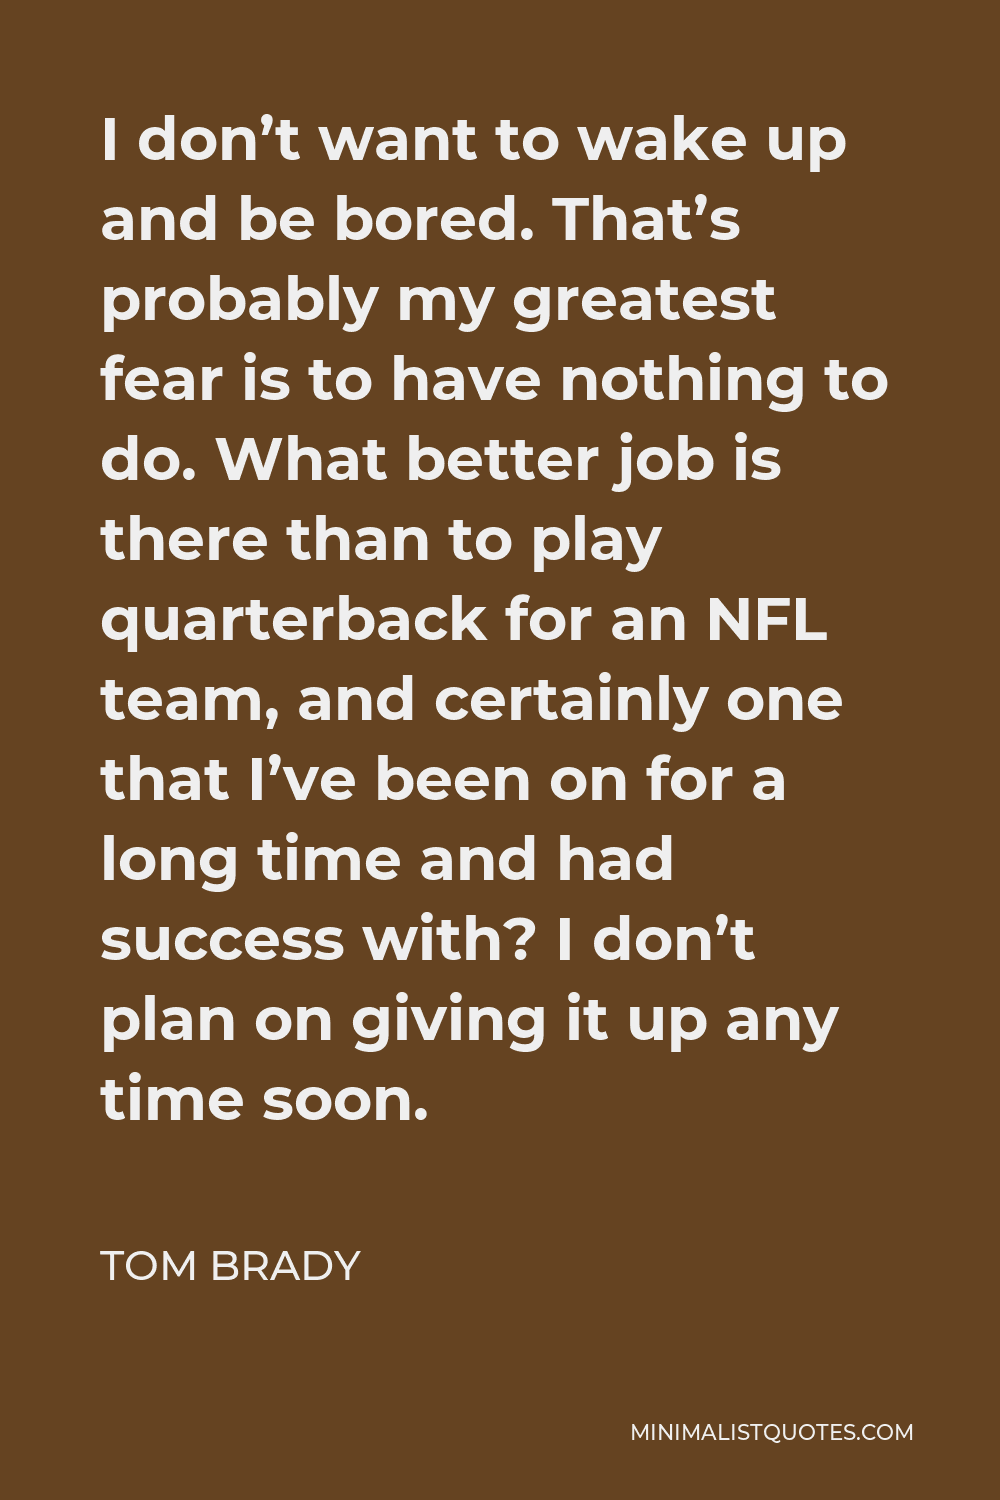 Tom Brady Quote - I don’t want to wake up and be bored. That’s probably my greatest fear is to have nothing to do. What better job is there than to play quarterback for an NFL team, and certainly one that I’ve been on for a long time and had success with? I don’t plan on giving it up any time soon.